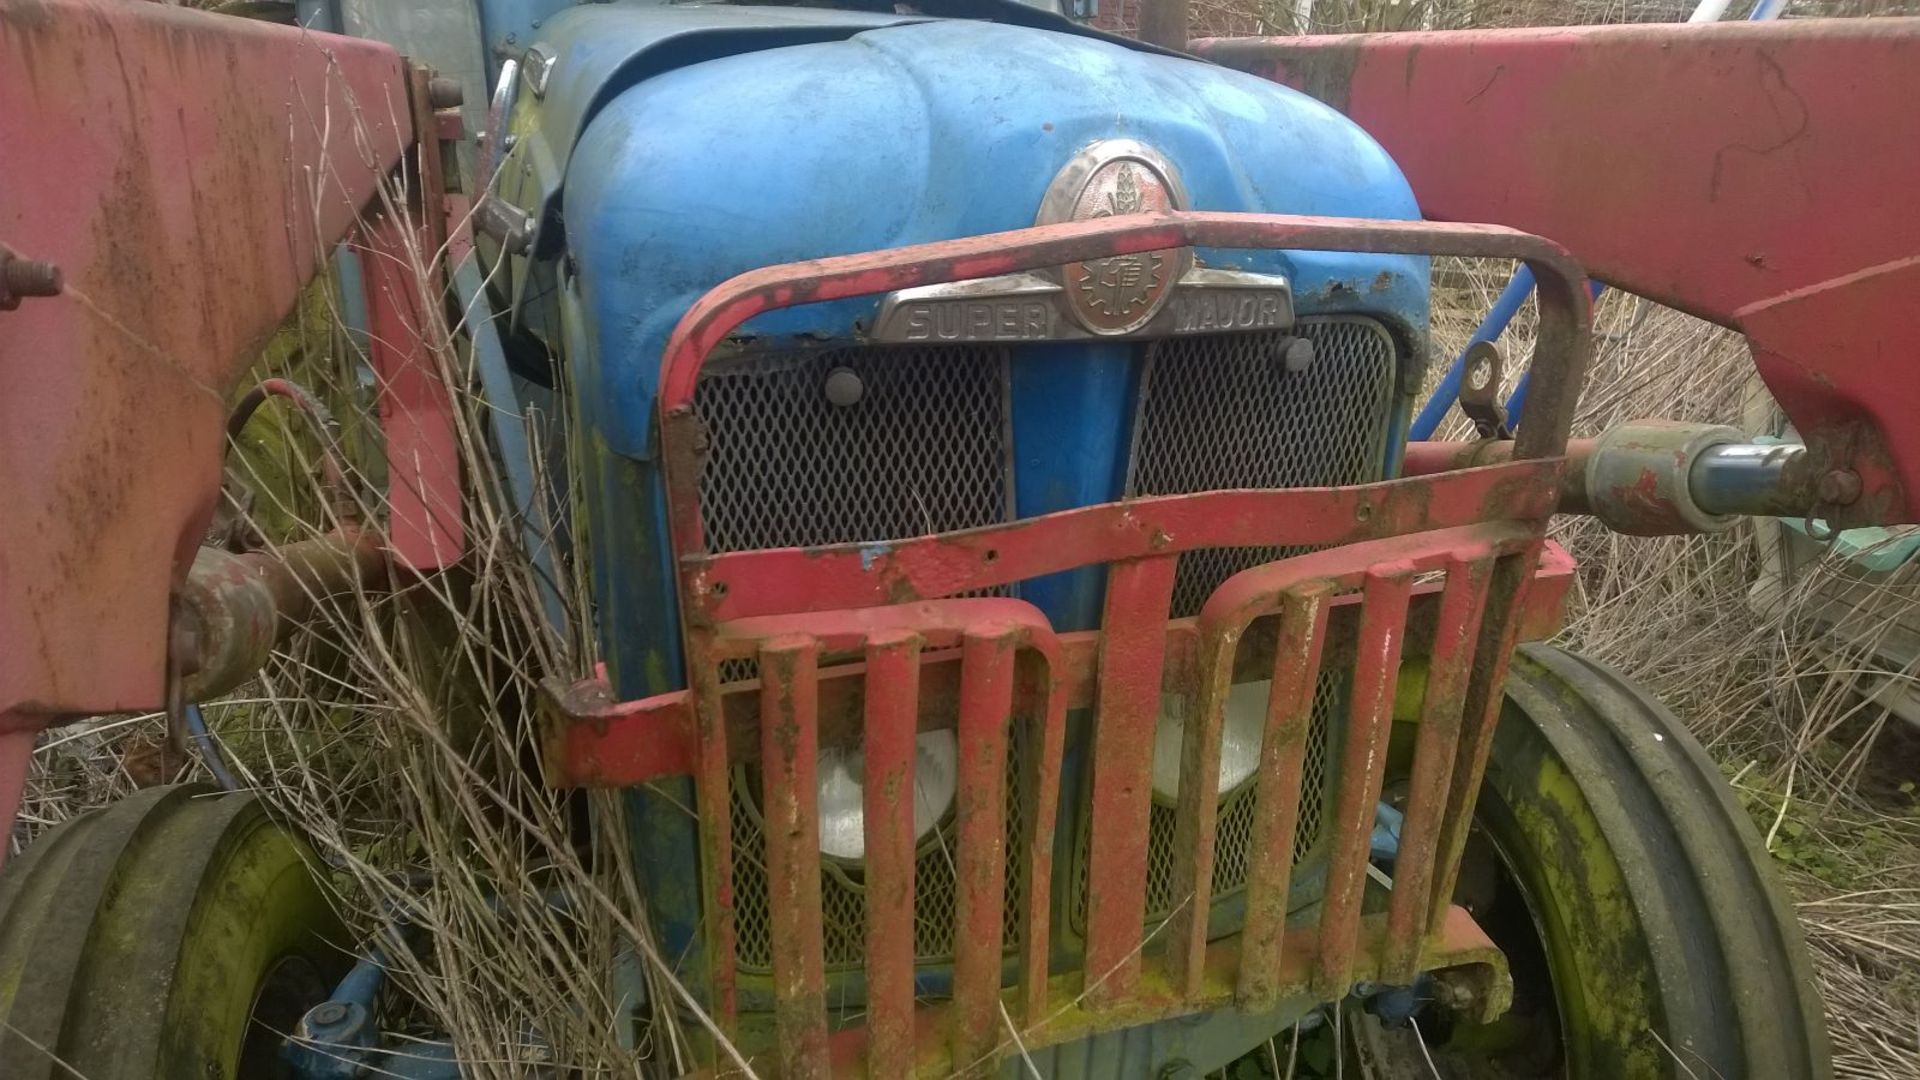 FORDSON  SUPER MAJOR c/w POWER LOADER   WE HAVENT HEARD IT RUNNING YET BUT WE ARE INTENDING TO GET - Image 2 of 20